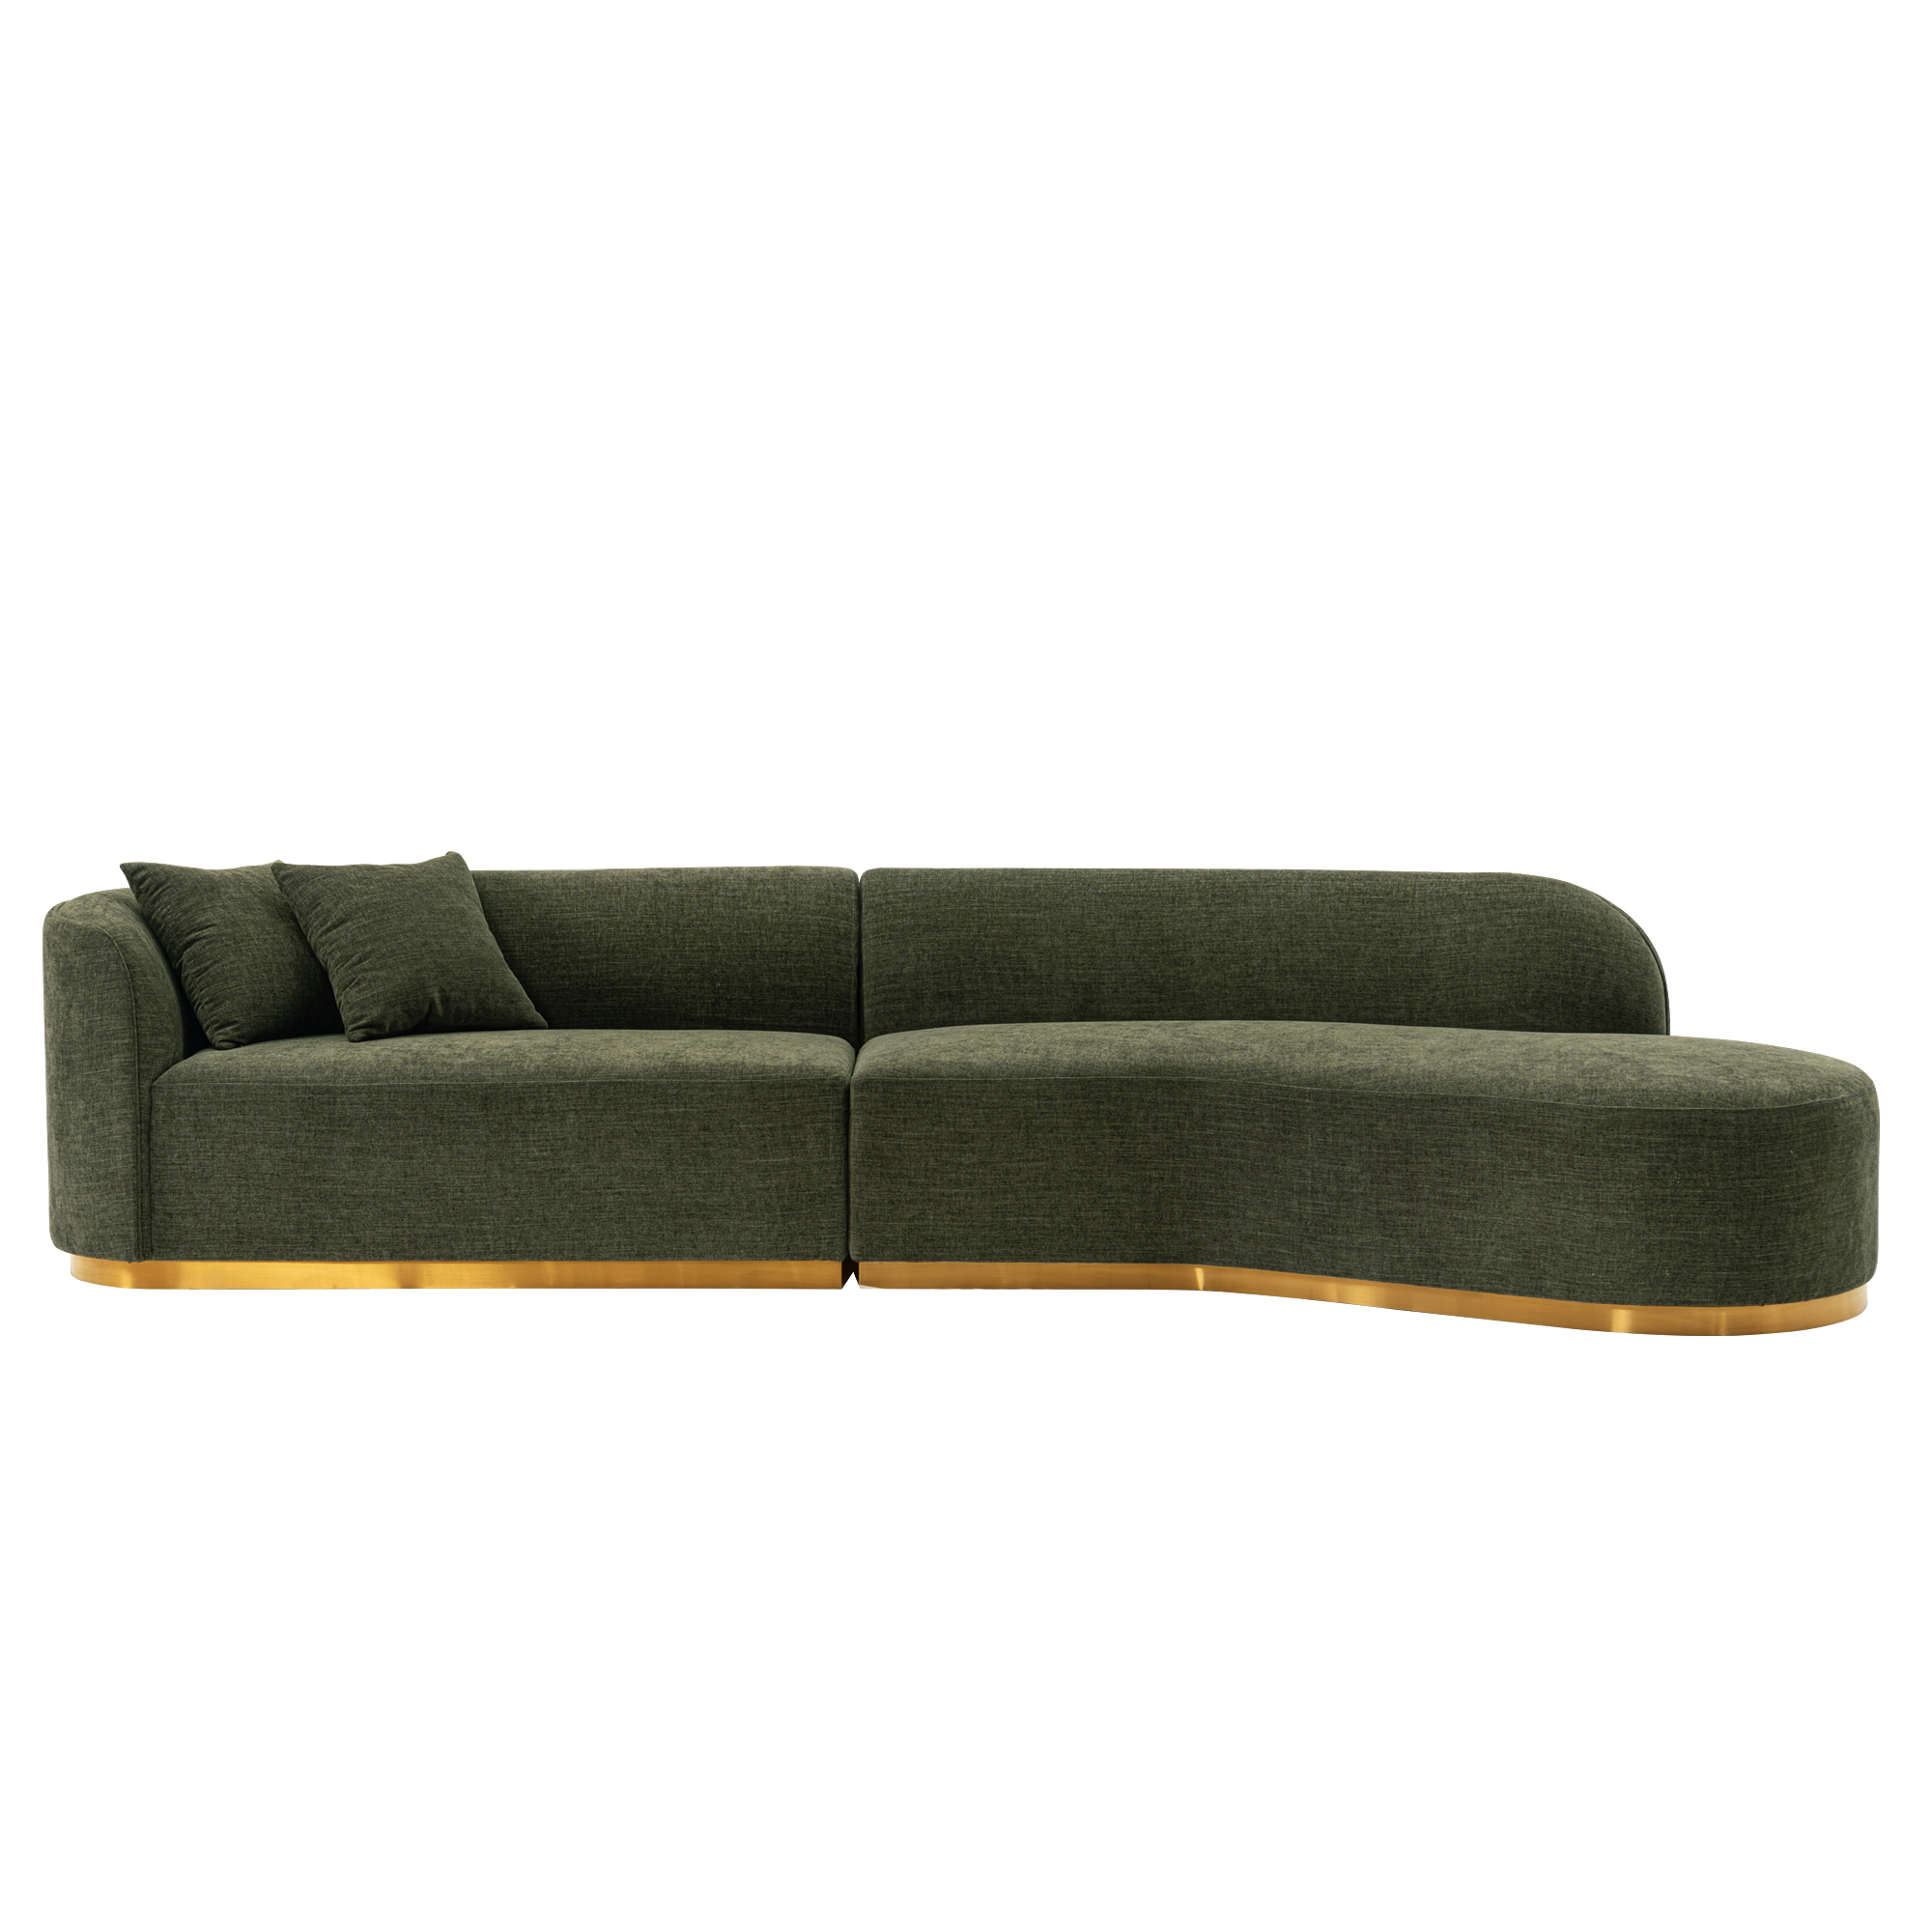 Manhattan Comfort, Daria Linen Sofa Sectional with Pillows in Olive, Primary Color Olive, Included (qty.) 1 Model SF012